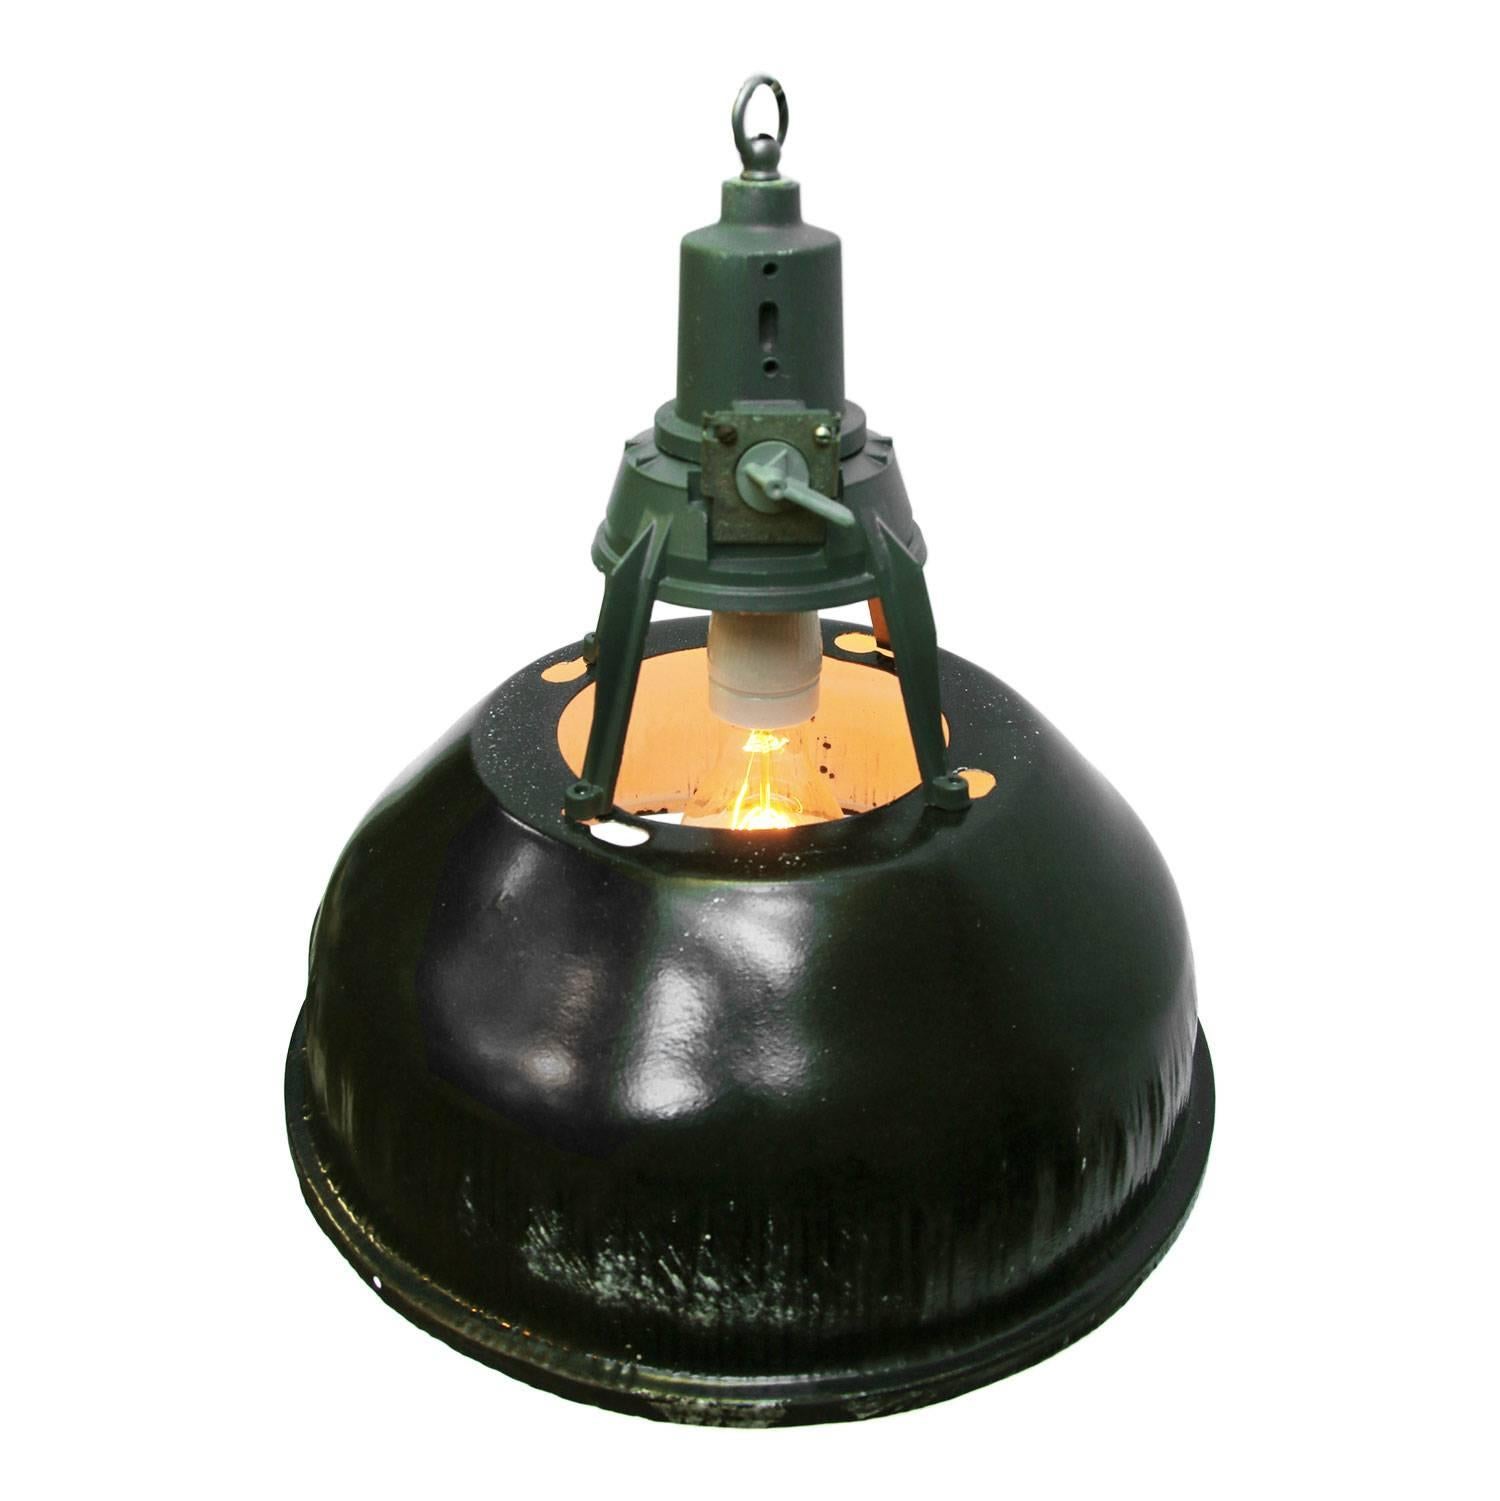 Enamel Industrial pendant. Black enamel shade, white inside.
Dark grey or green cast aluminium top.

Weight: 2.4 kg / 5.3 lb

All lamps have been made suitable by international standards for incandescent light bulbs, energy-efficient and LED